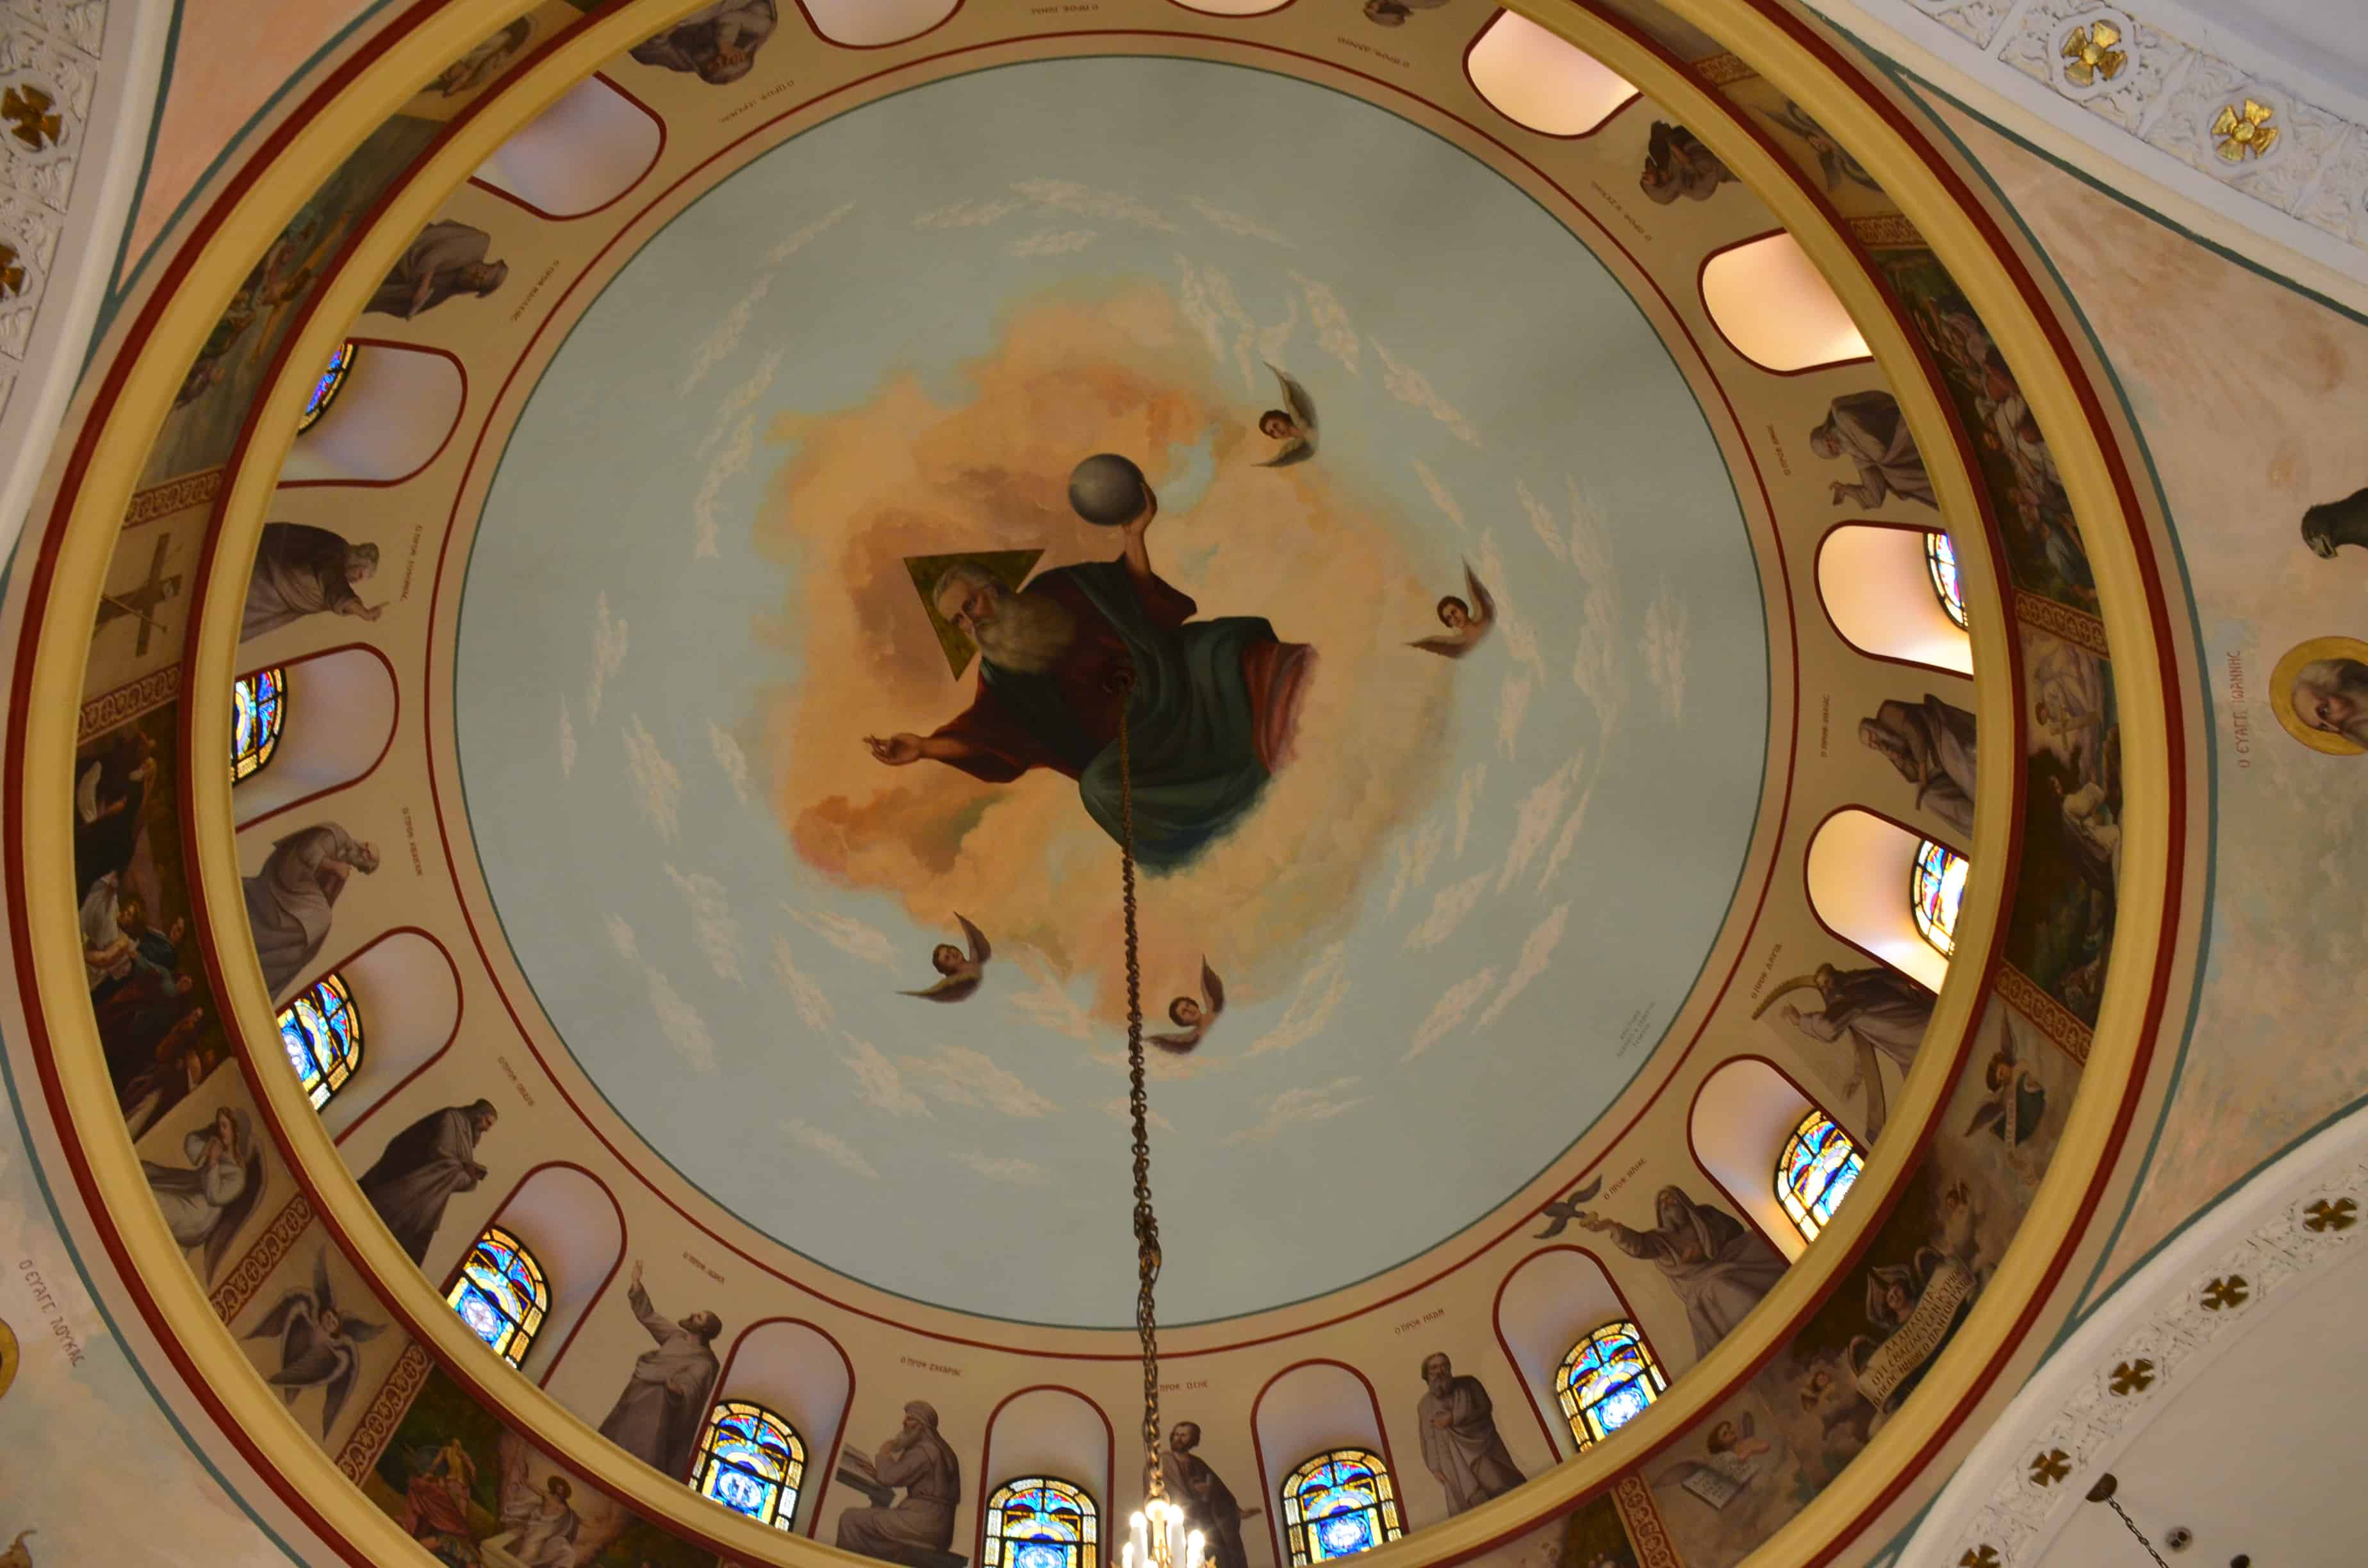 Dome of St. Nicholas Greek Orthodox Cathedral in Tarpon Springs, Florida